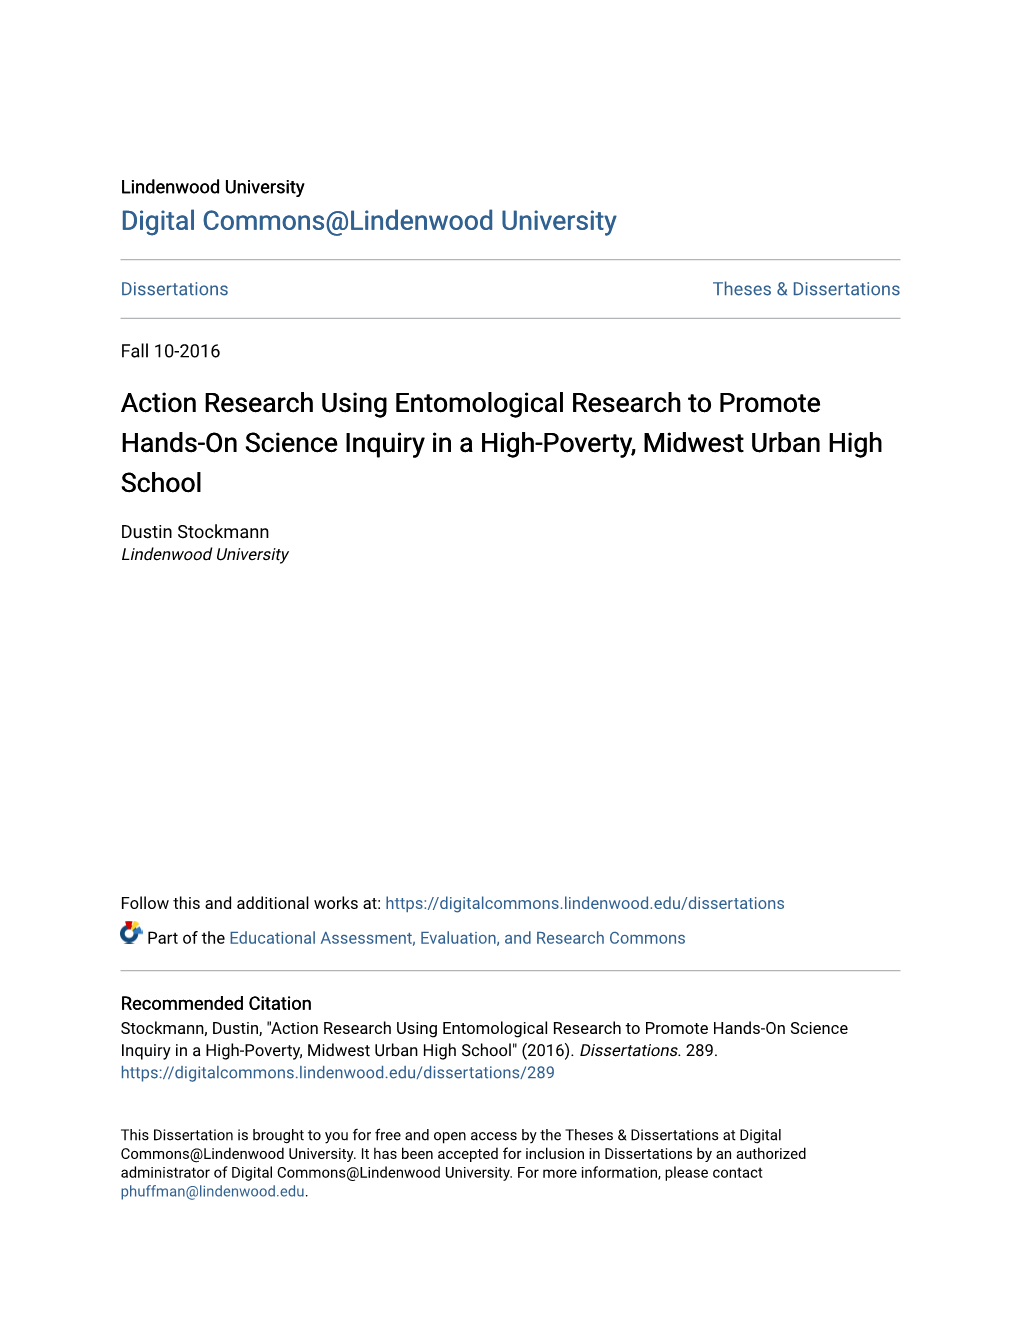 Action Research Using Entomological Research to Promote Hands-On Science Inquiry in a High-Poverty, Midwest Urban High School